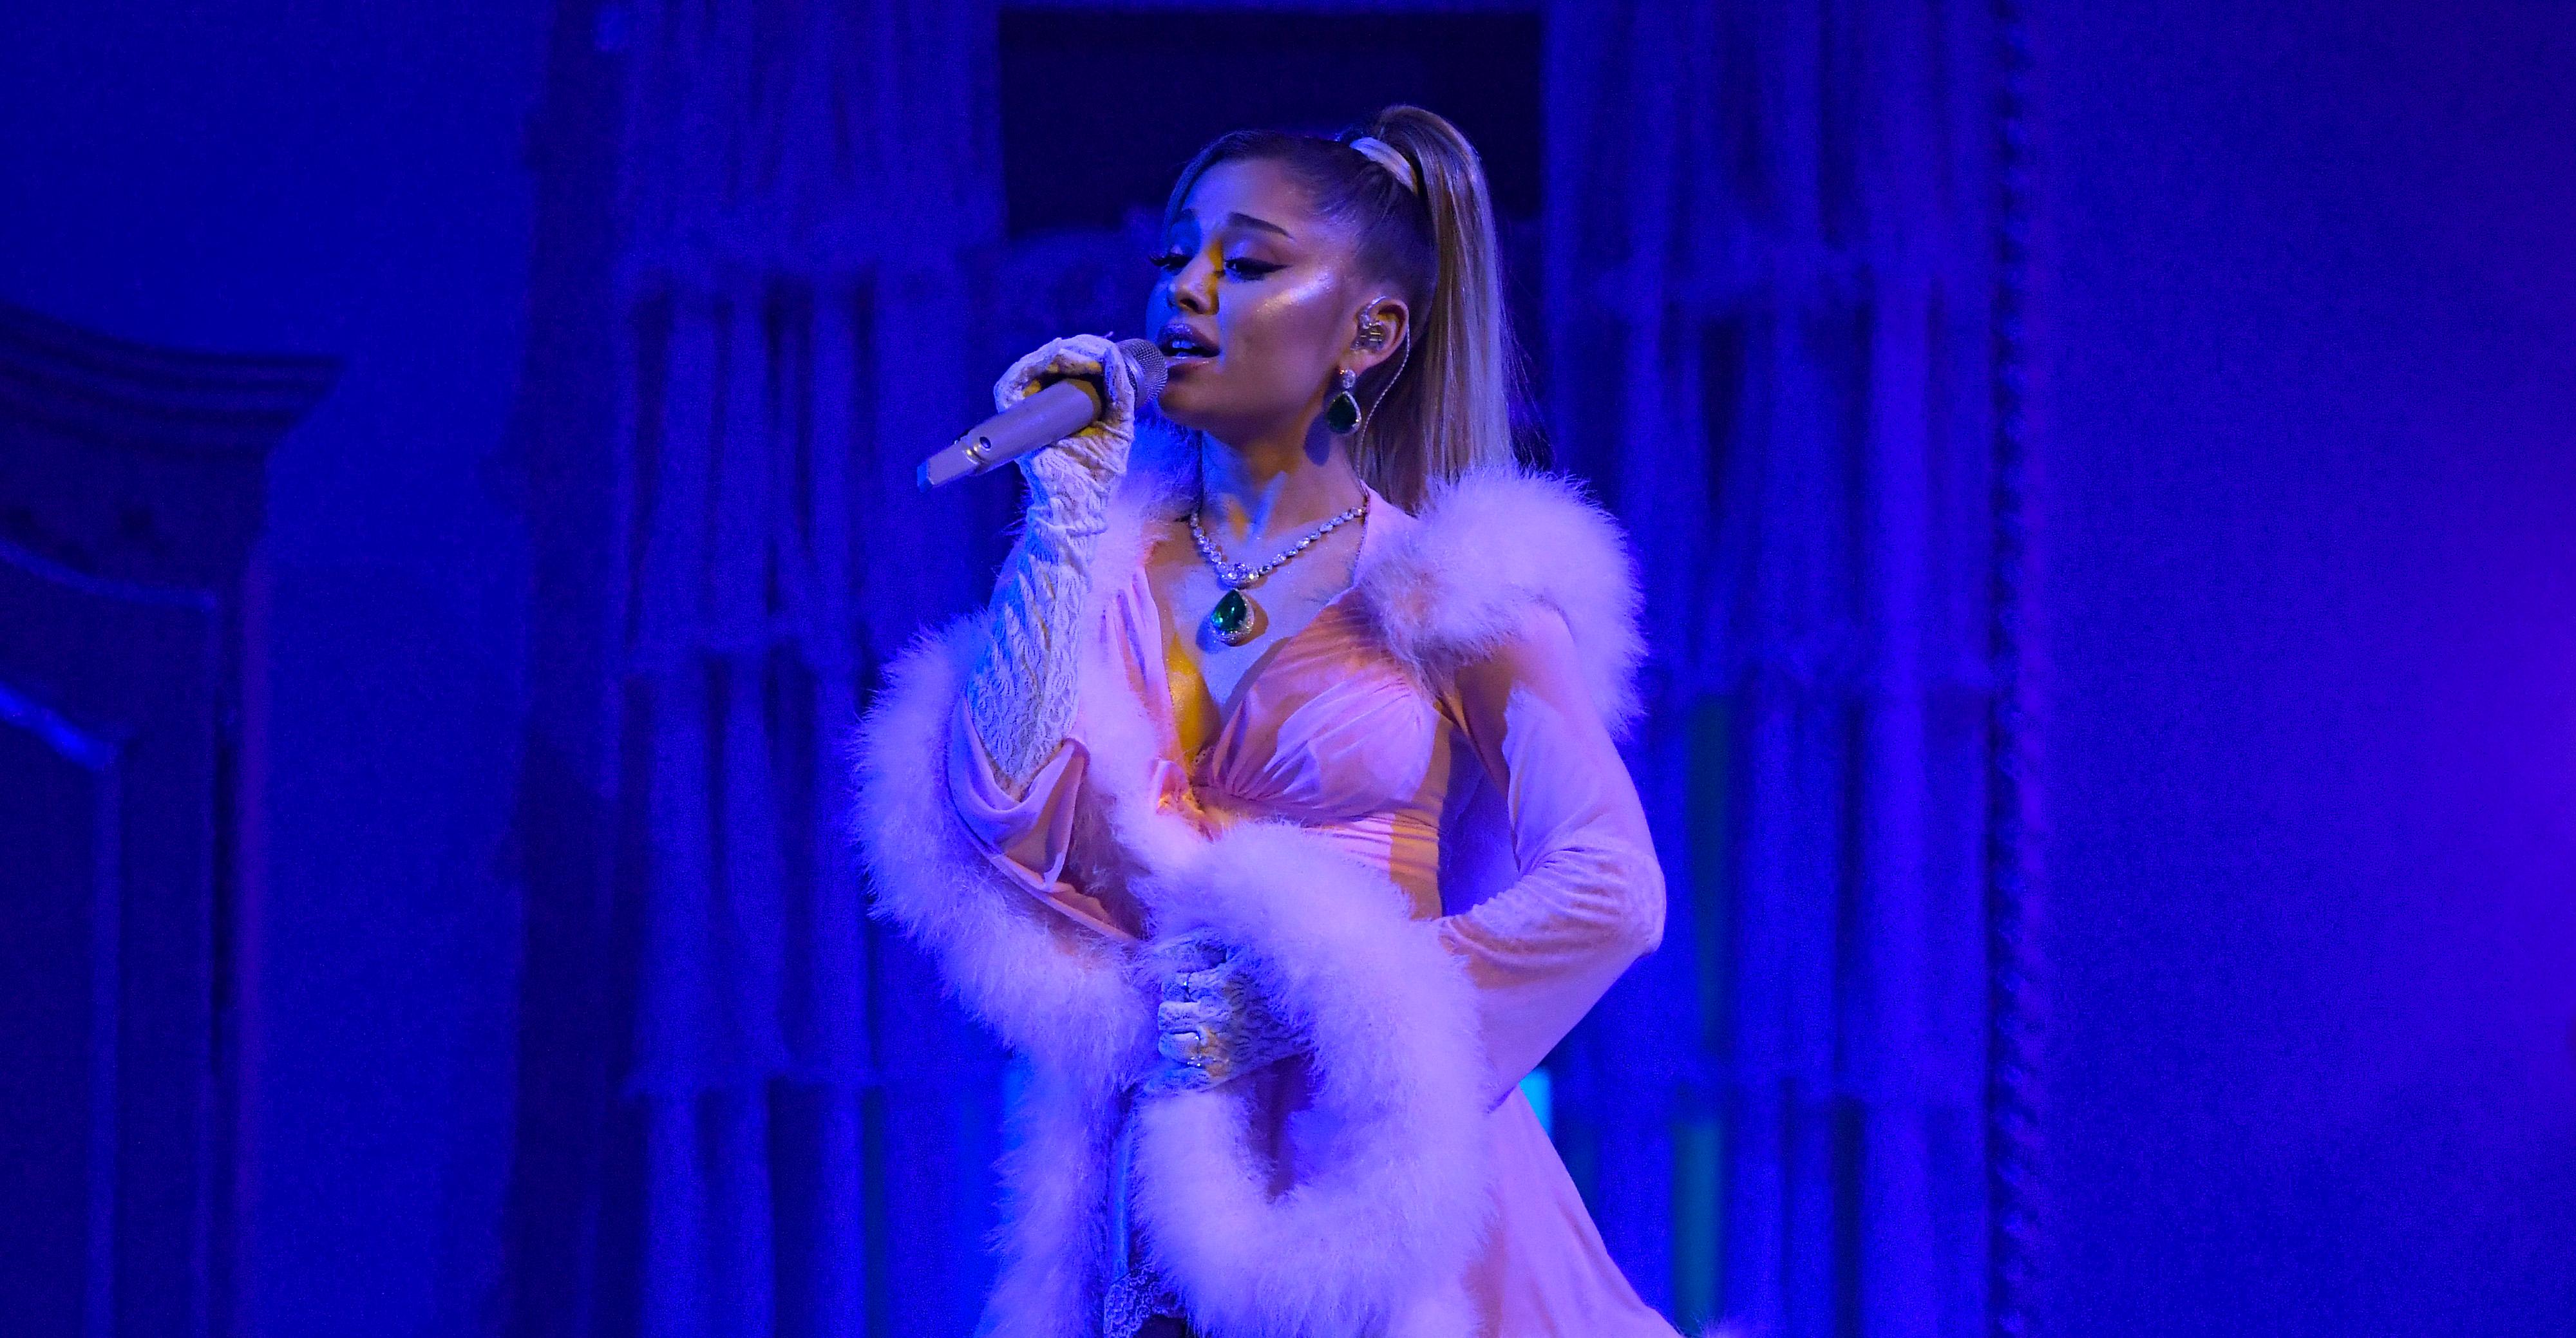 Ariana Grande makes sure to wear an earpiece during her 2020 Grammy Awards performance.